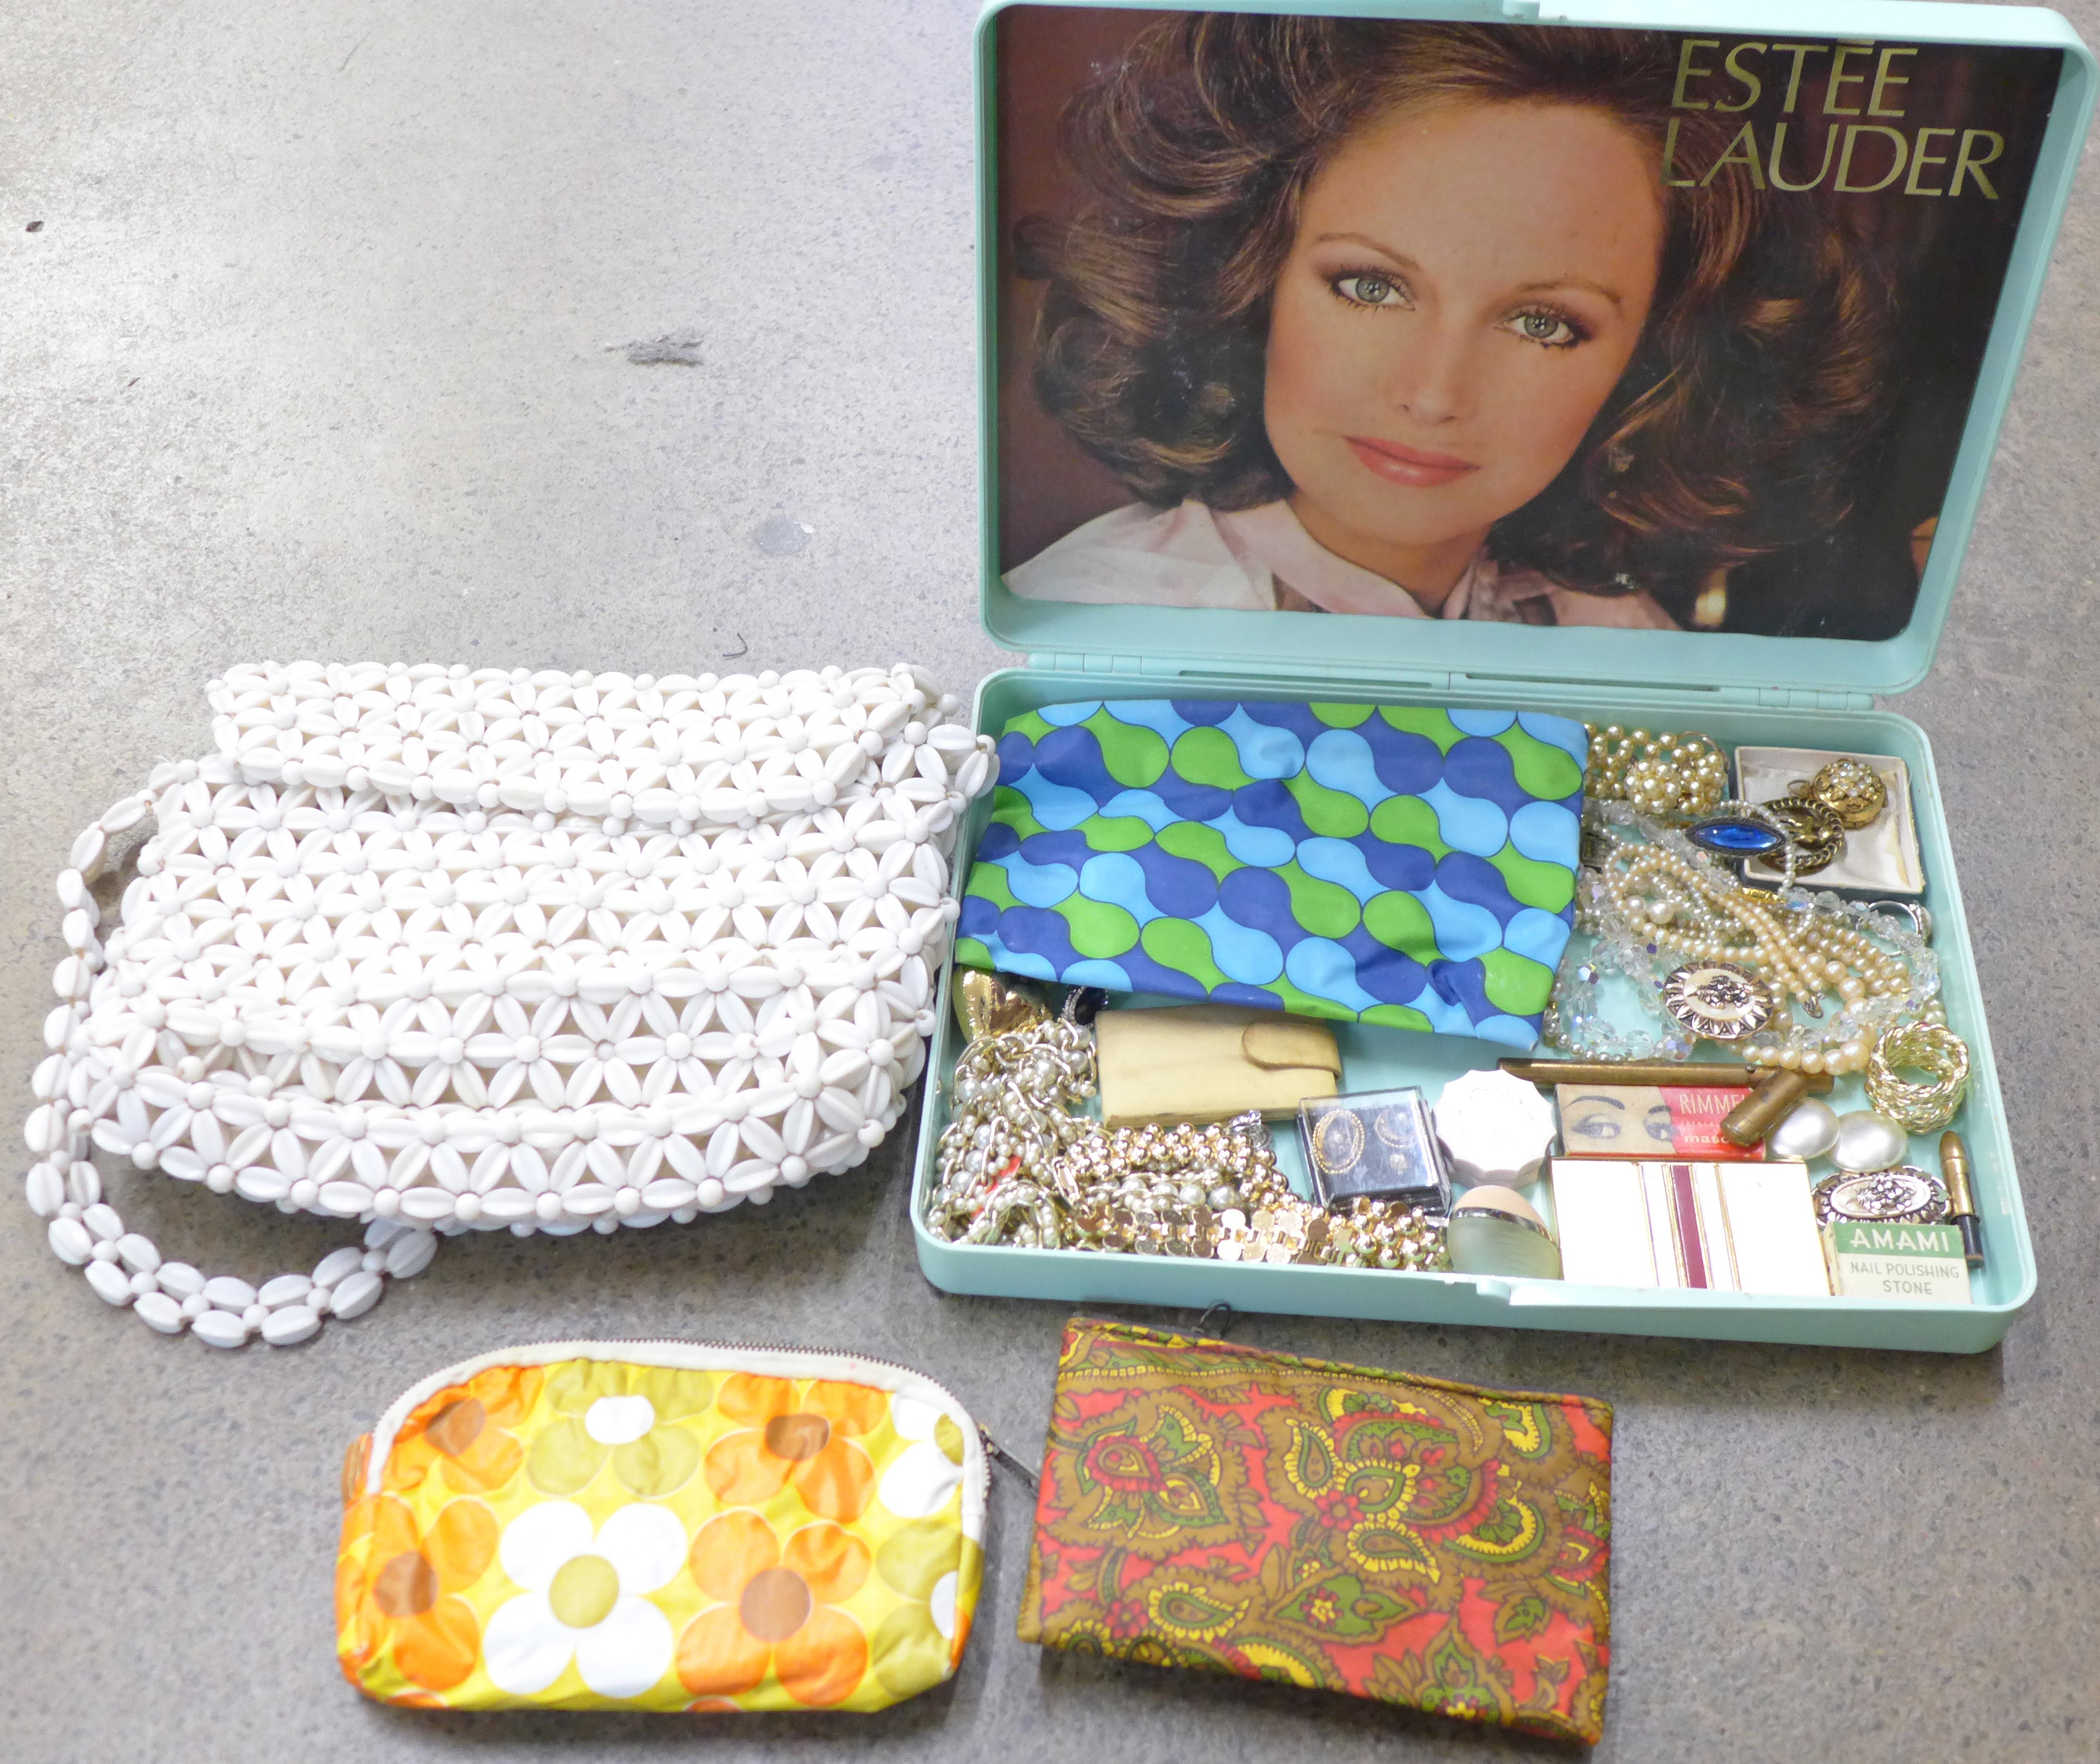 An Estee Lauder box with vintage make up bags, compact, costume jewellery and a bead bag - Image 2 of 11